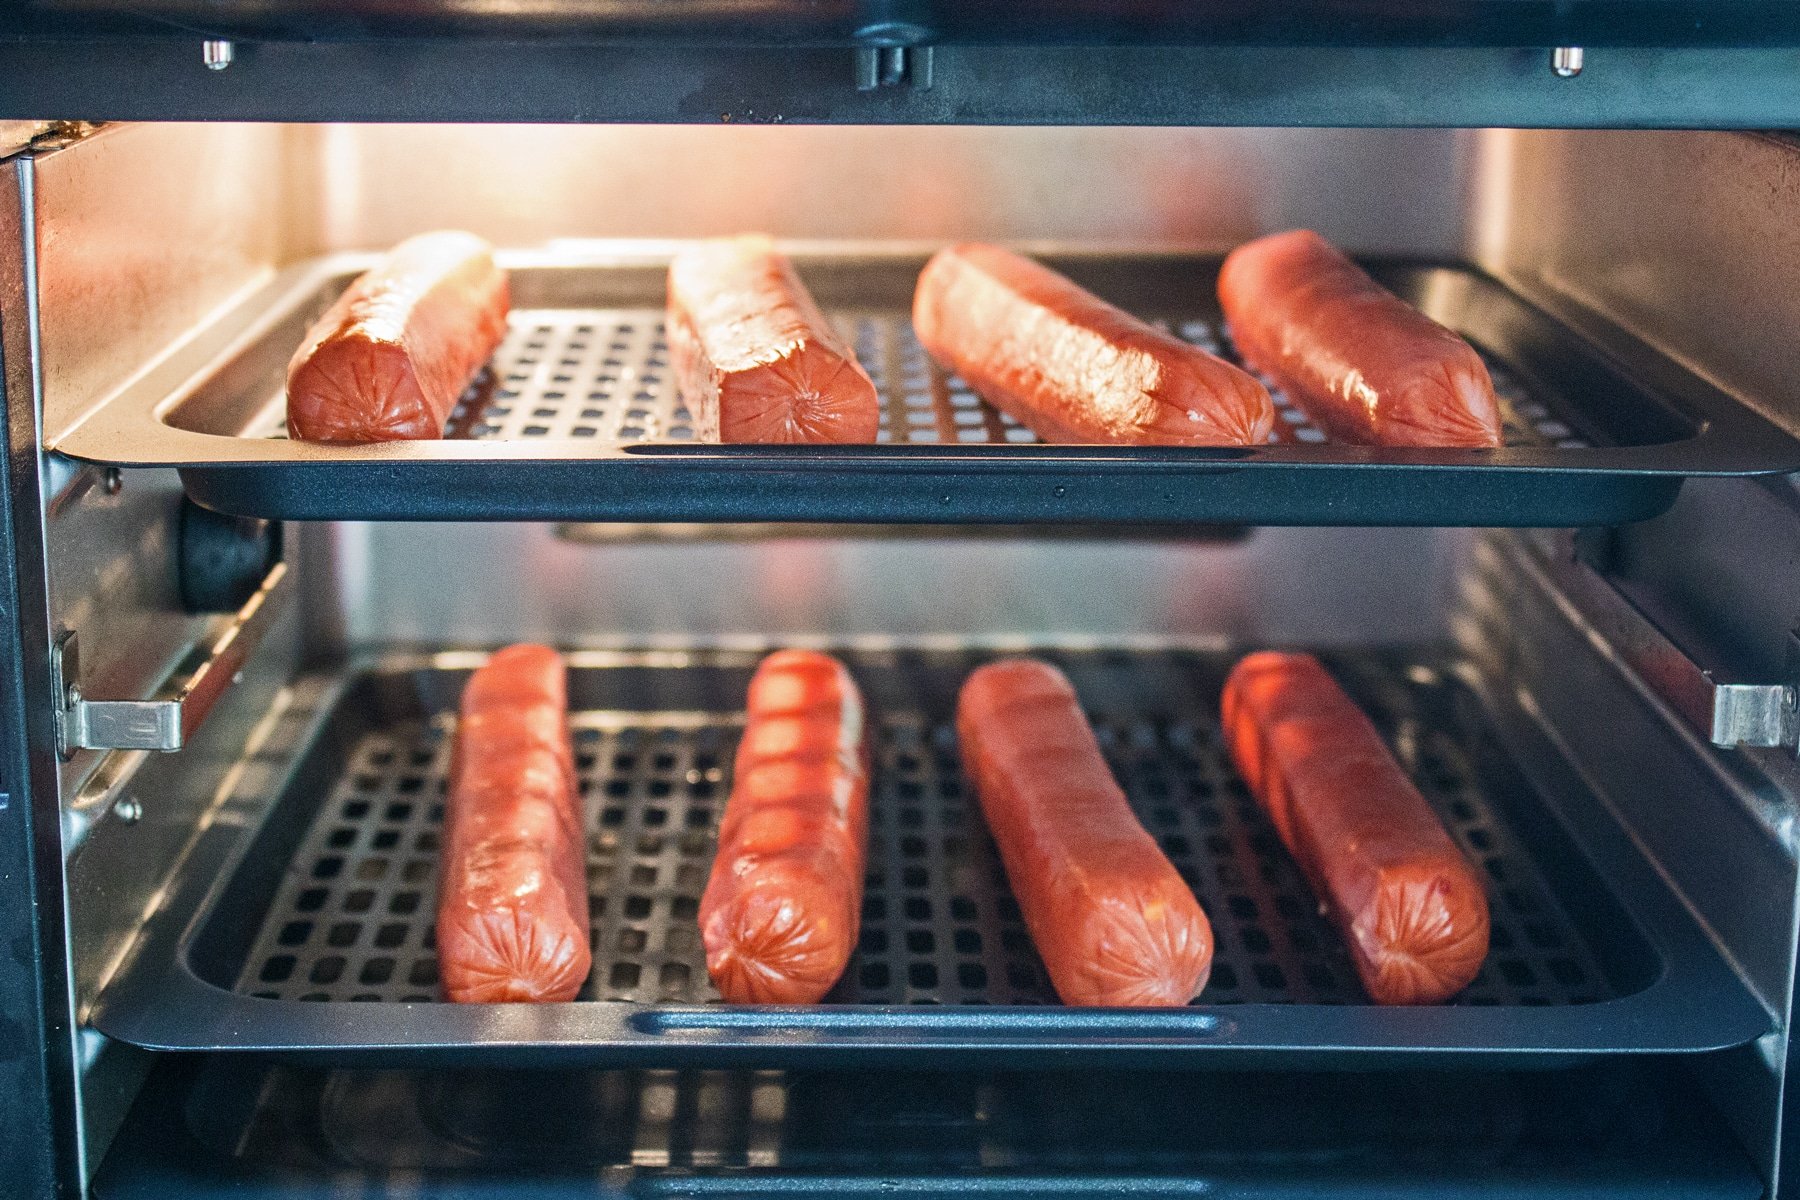 How Long To Cook Hotdogs In Toaster Oven